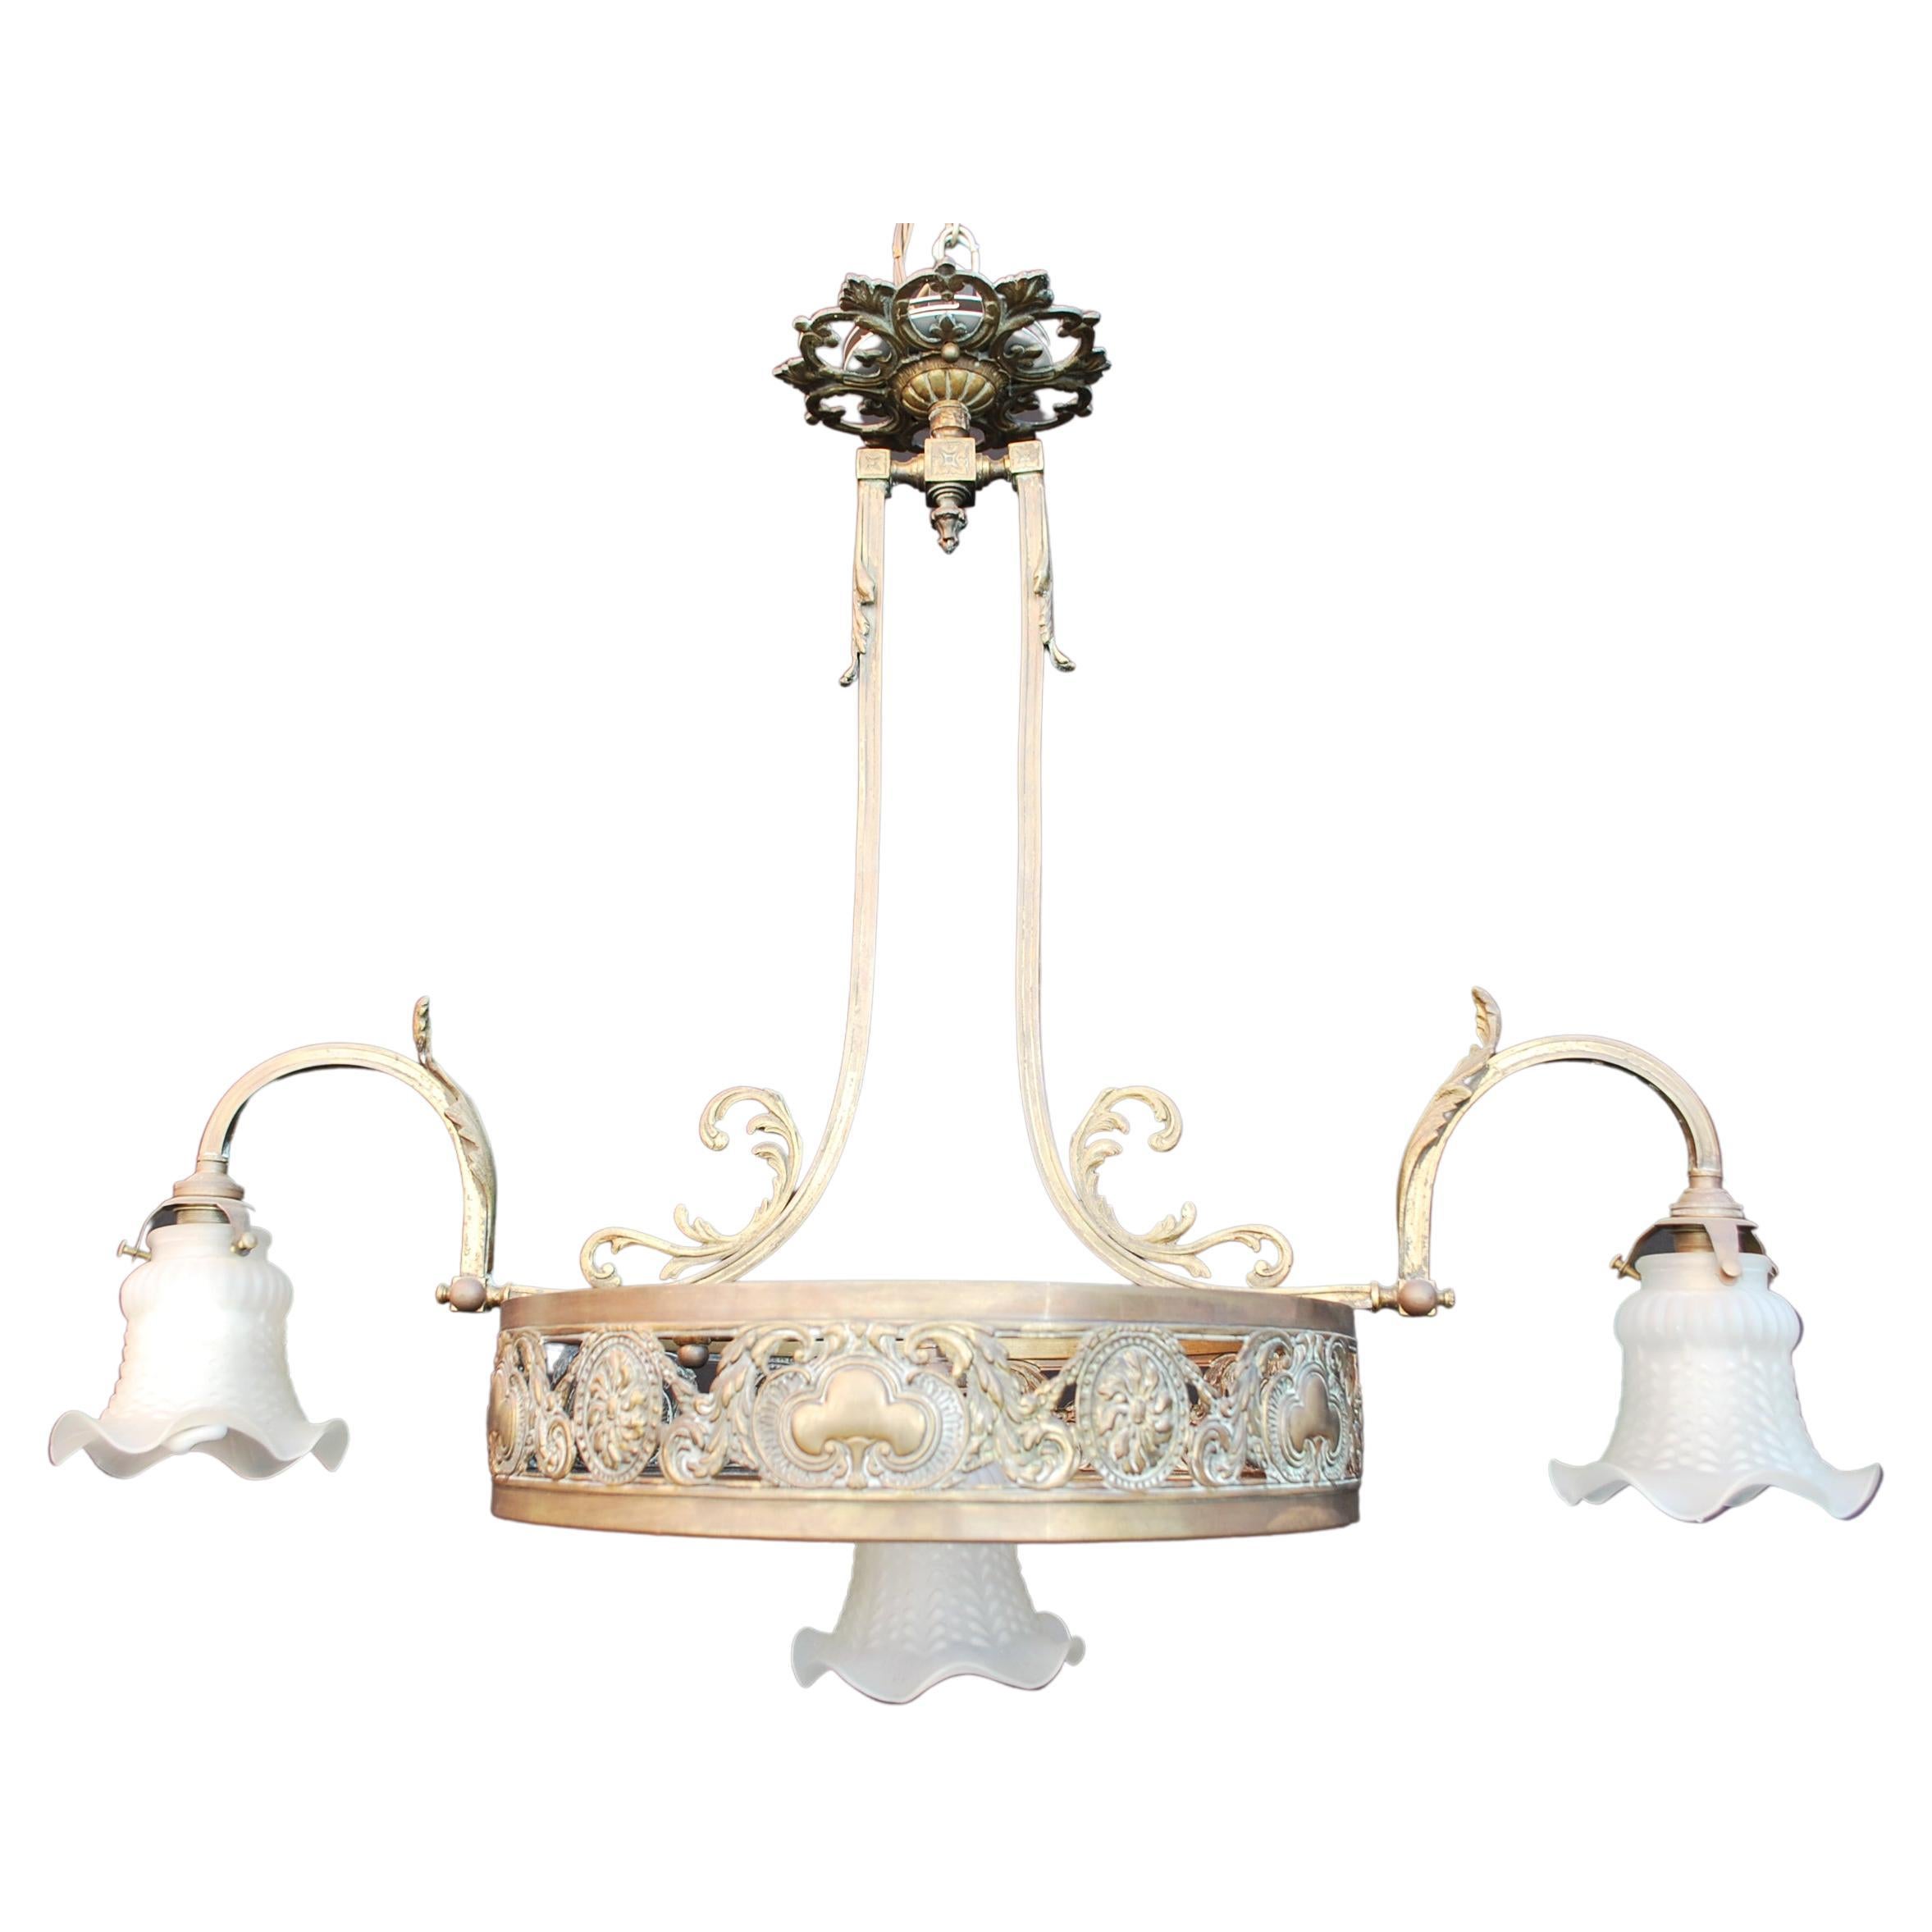 Elegant Turn of the Century French POOL Table Light For Sale